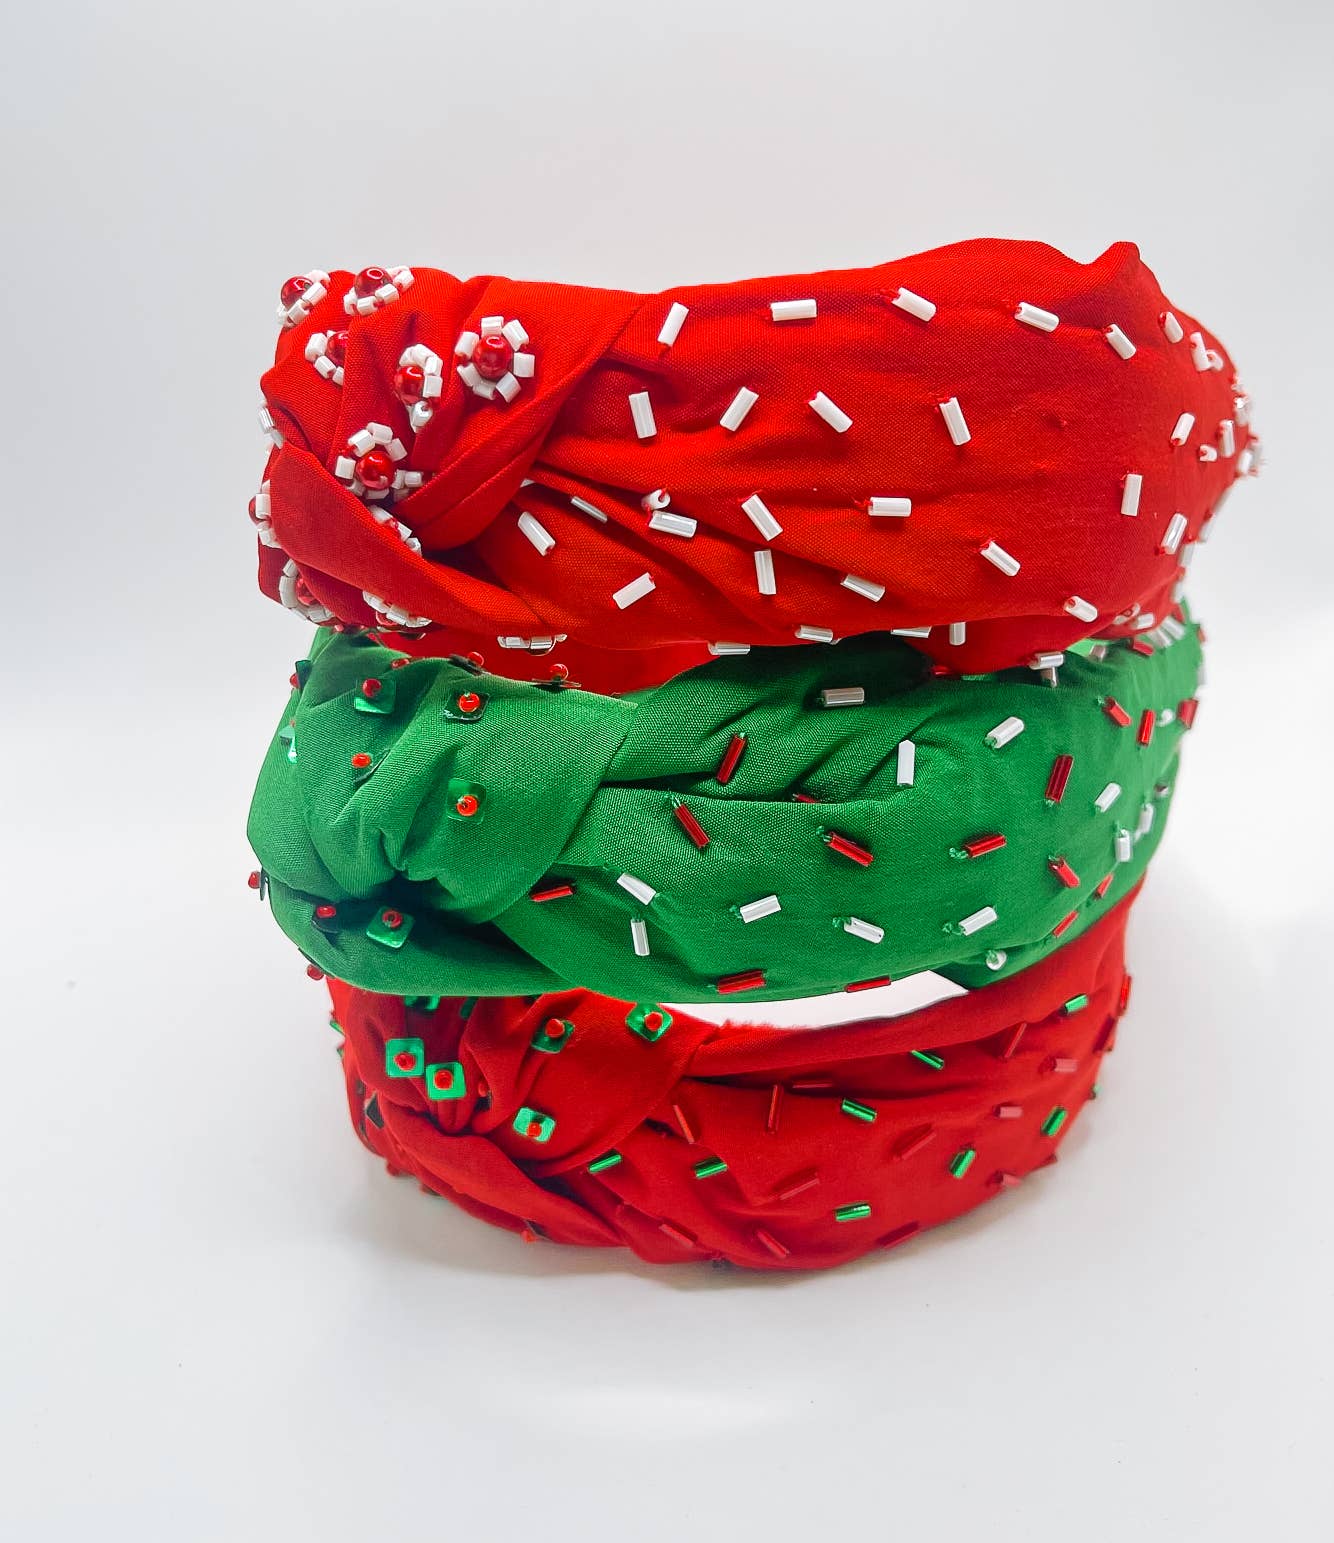 Three Bash Christmas Beaded Headbands with Red Fabric and Green Red Sprinkles, perfect for holiday festivities.